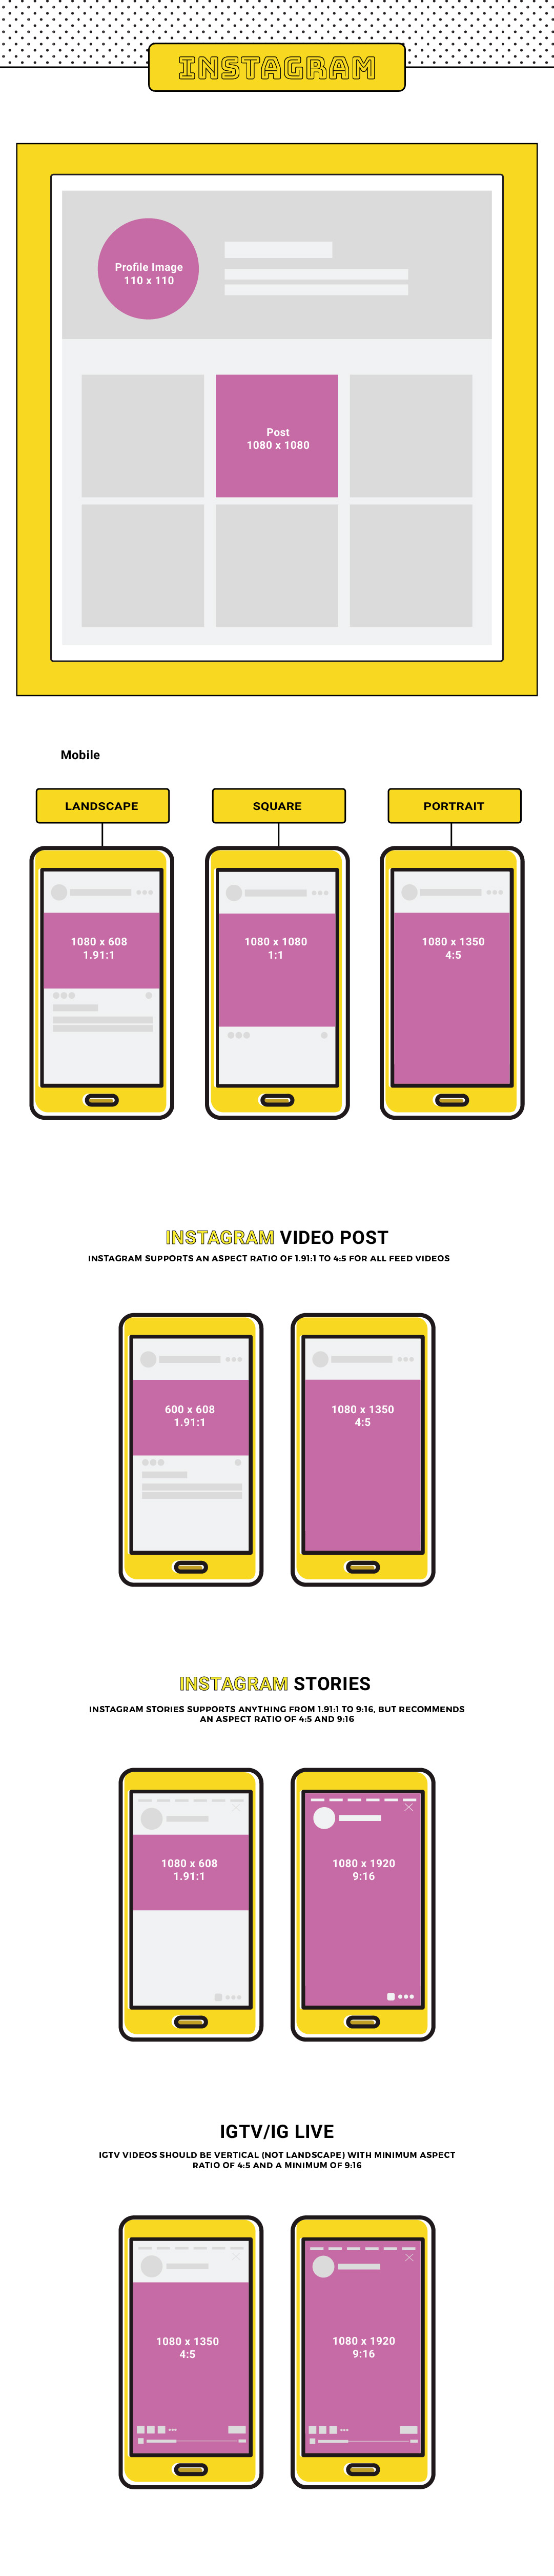 Instagram image size guide